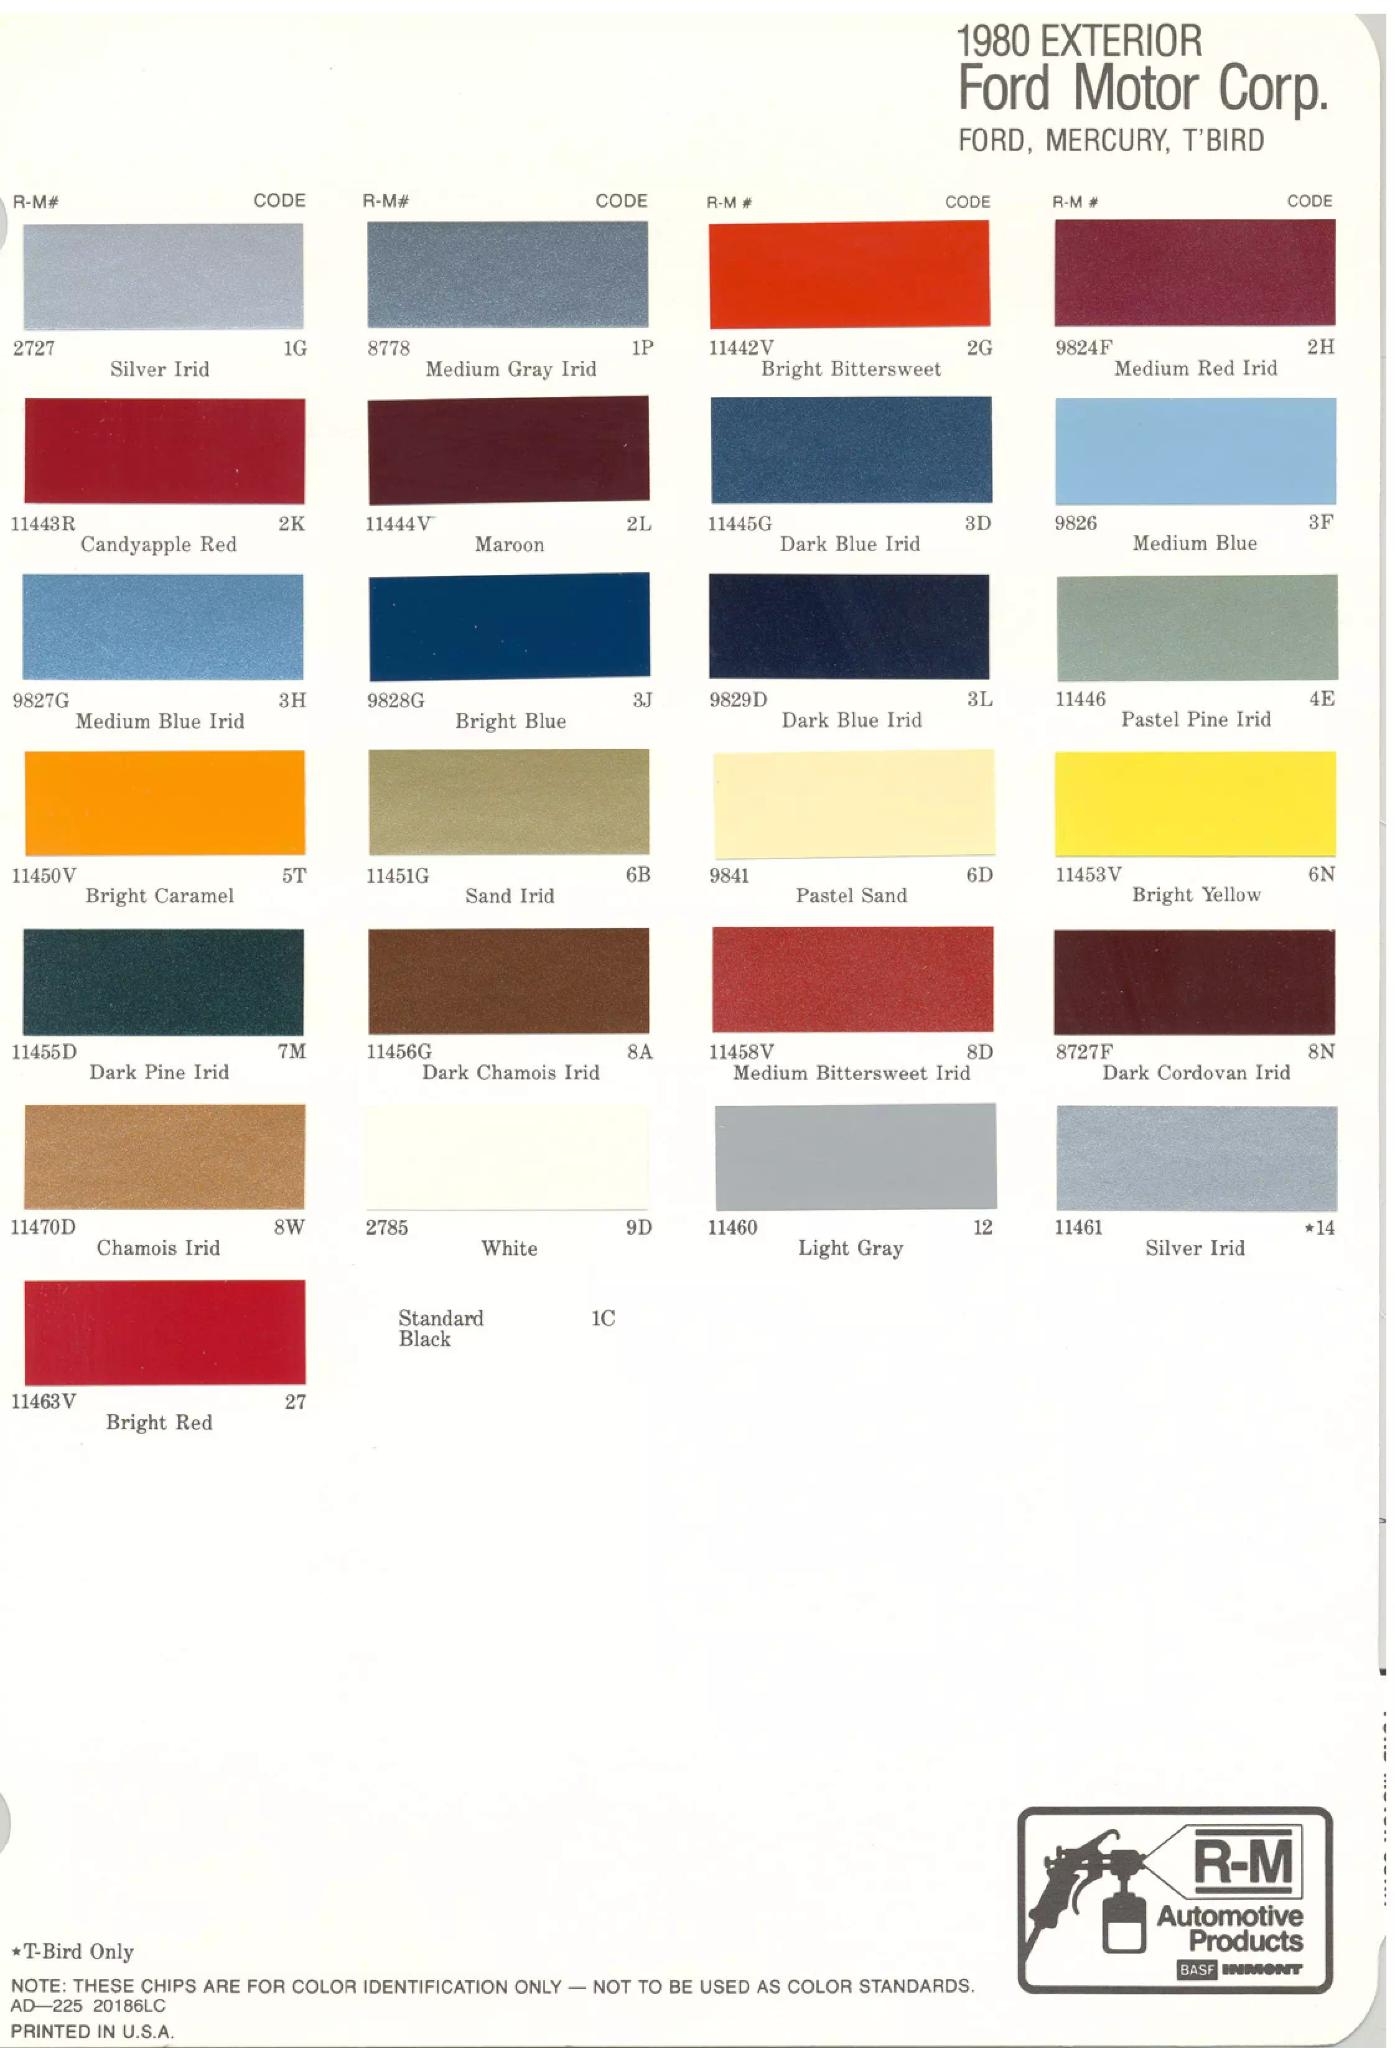 colors and thier codes used on Ford and Mercury vehicles in 1980